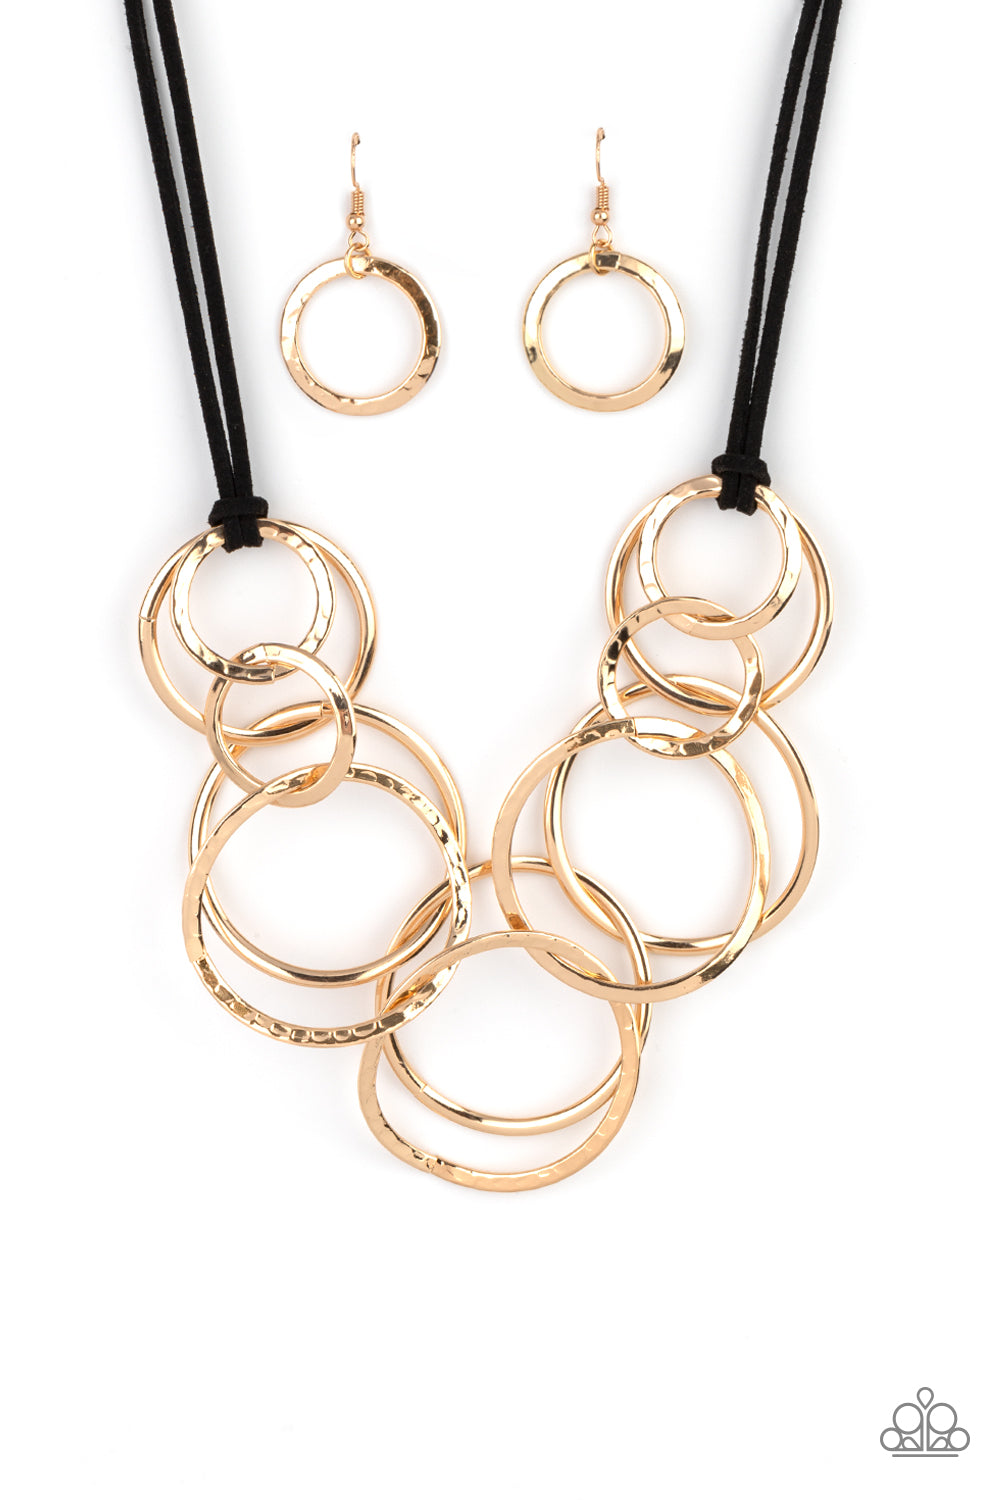 Spiraling Out of COUTURE Gold Necklace - Paparazzi Accessories  Black suede cords knot around a mismatched assortment of hammered gold rings that interlock below the collar, creating two rows of dizzying texture. Features an adjustable clasp closure. Sold as one individual necklace. Includes one pair of matching earrings.  All Paparazzi Accessories are lead free and nickel free!  Sold as one individual necklace. Includes one pair of matching earrings.